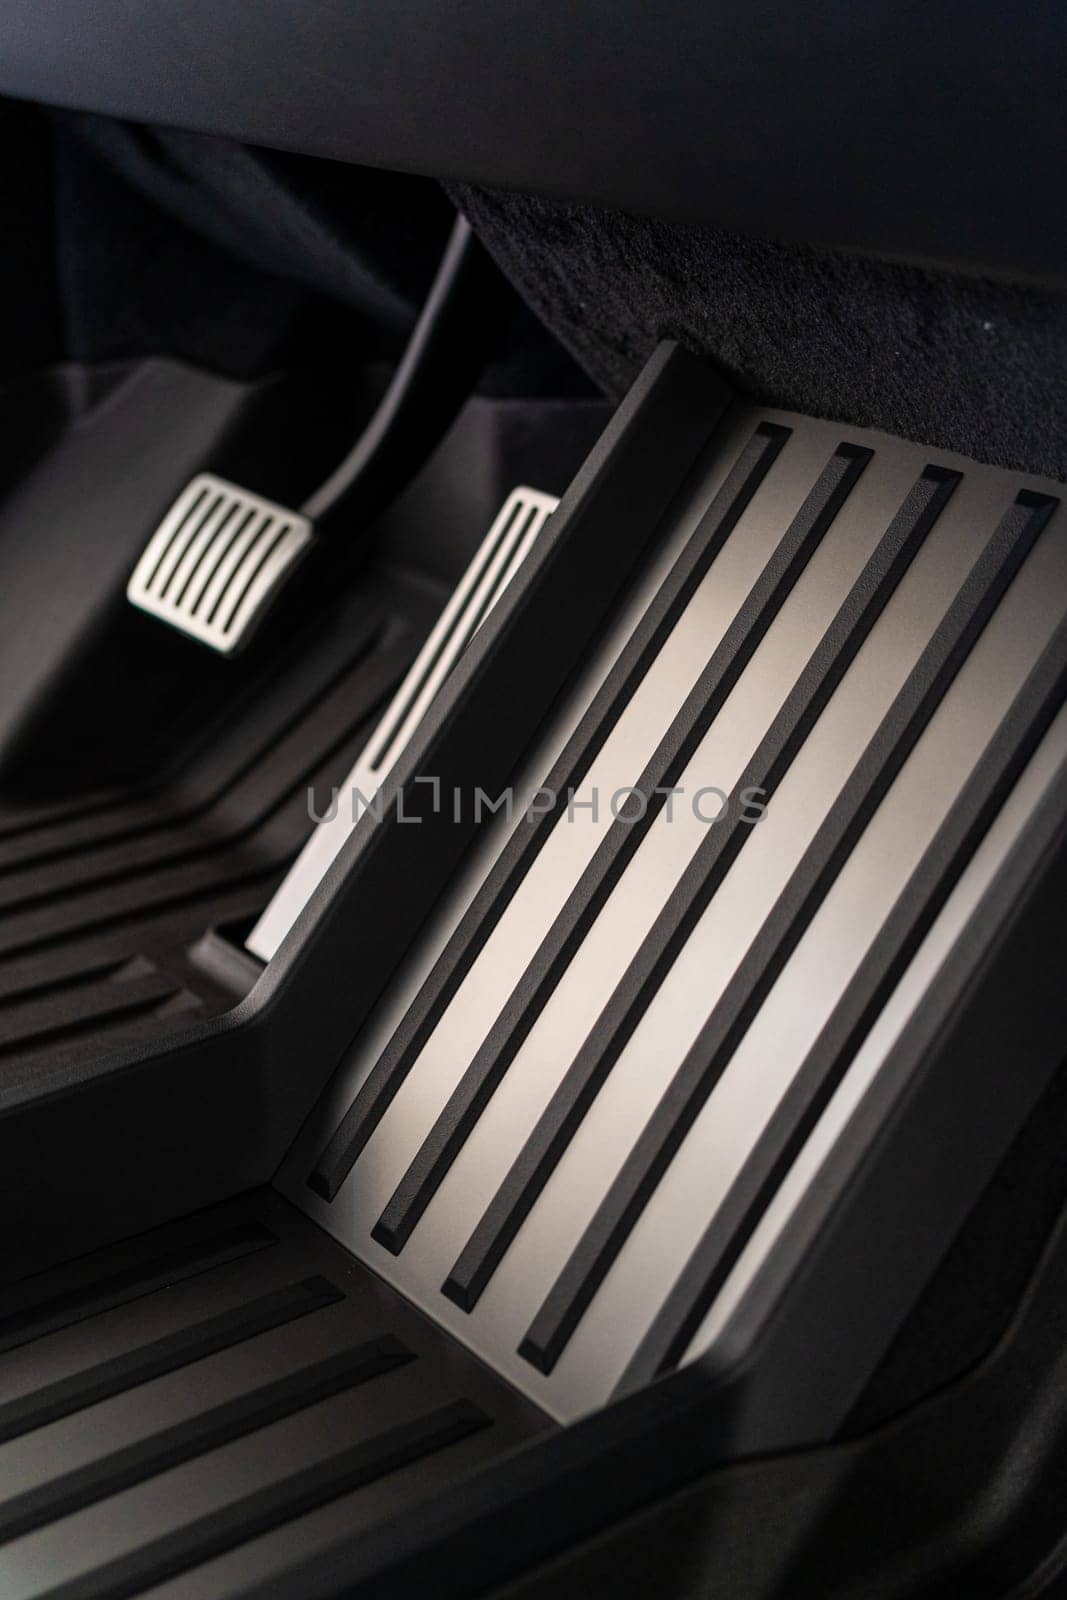 Denver, Colorado, USA-May 5, 2024-his image features a close-up view of the aluminum accelerator and brake pedals alongside the metal floor mat in a Tesla Cybertruck, highlighting the vehicle sleek and modern interior design.